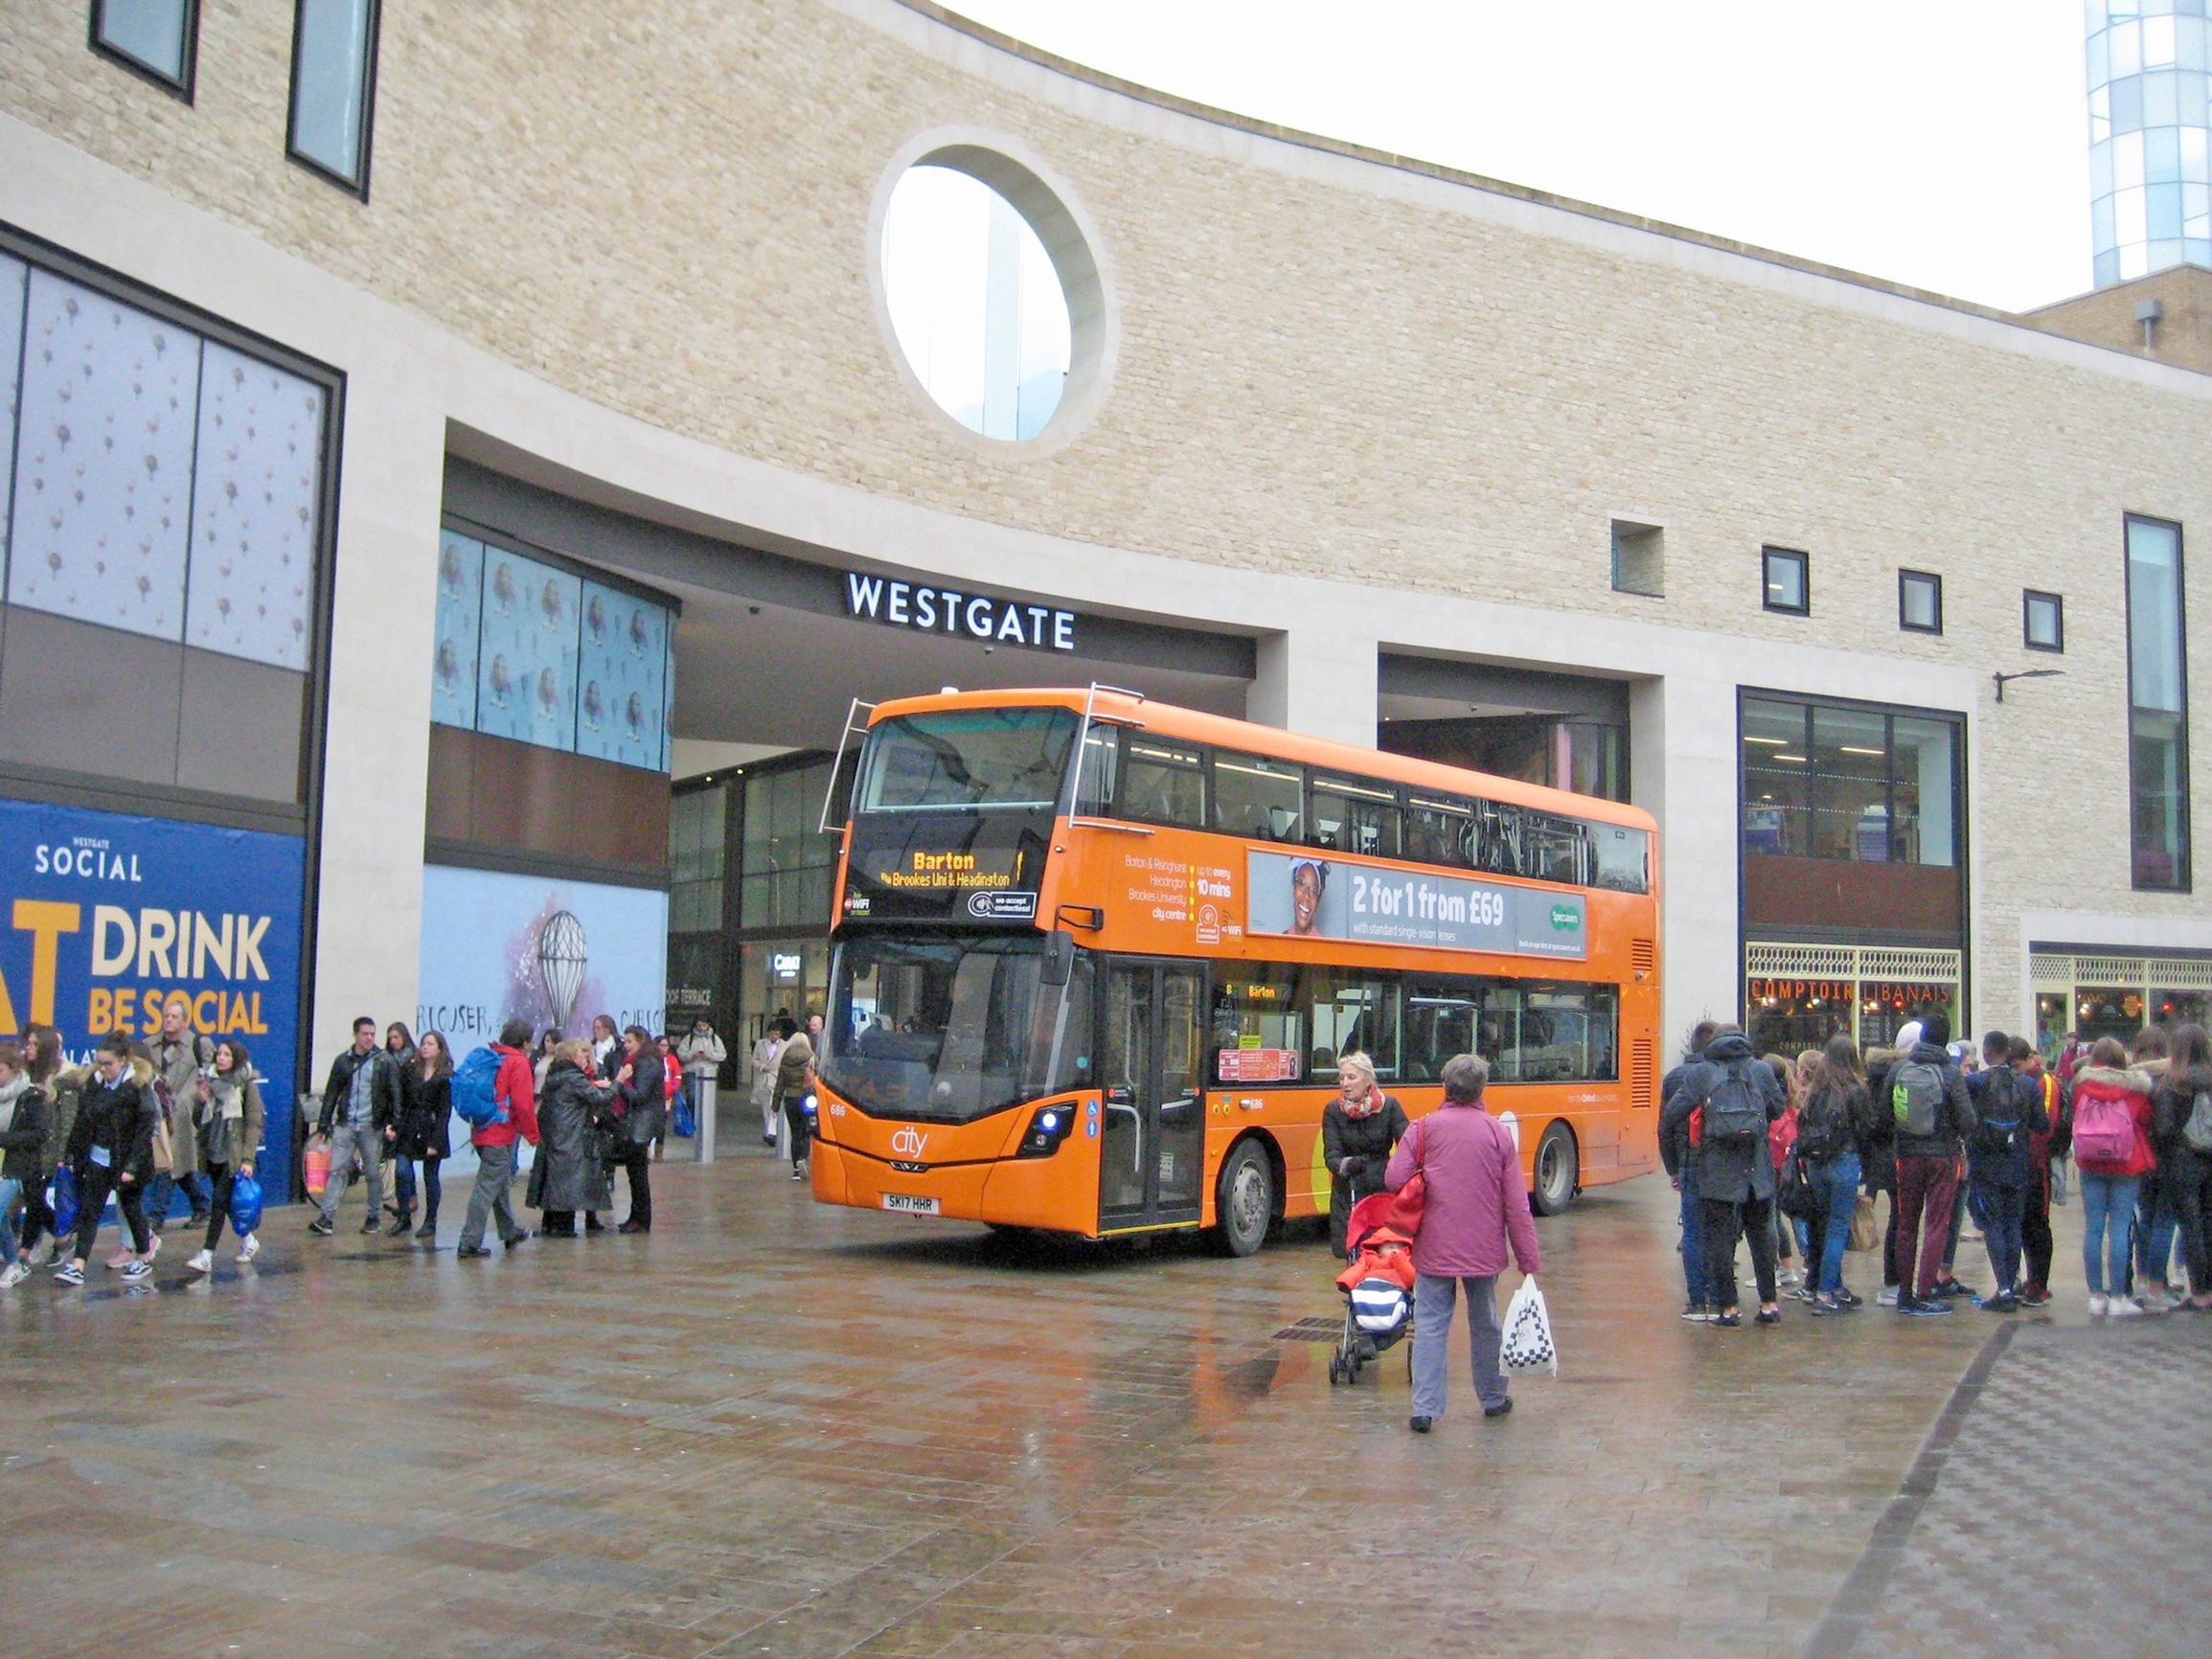 Queen Street, showing the pedestrian entrance to the Westgate shopping centre